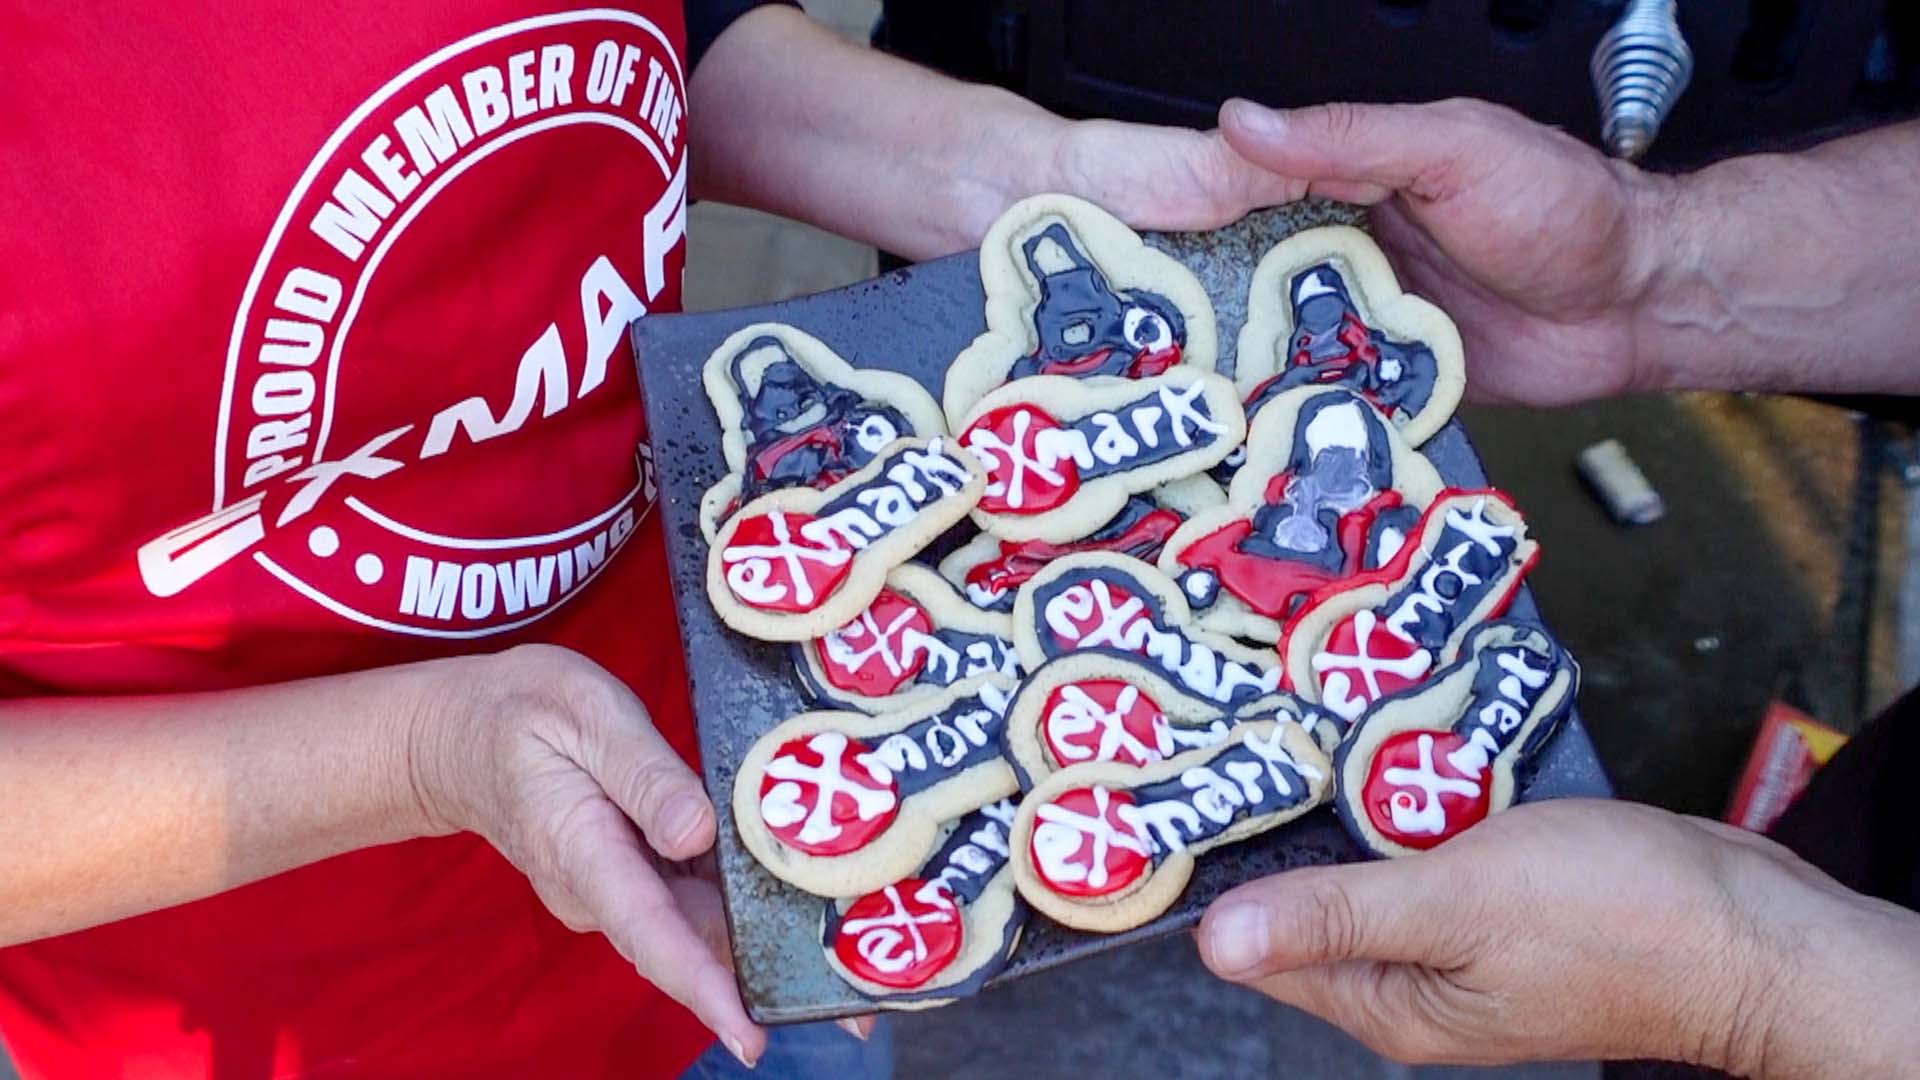 Greg Mrvich Spiced Sugar Cookies decorated like Exmark mowers